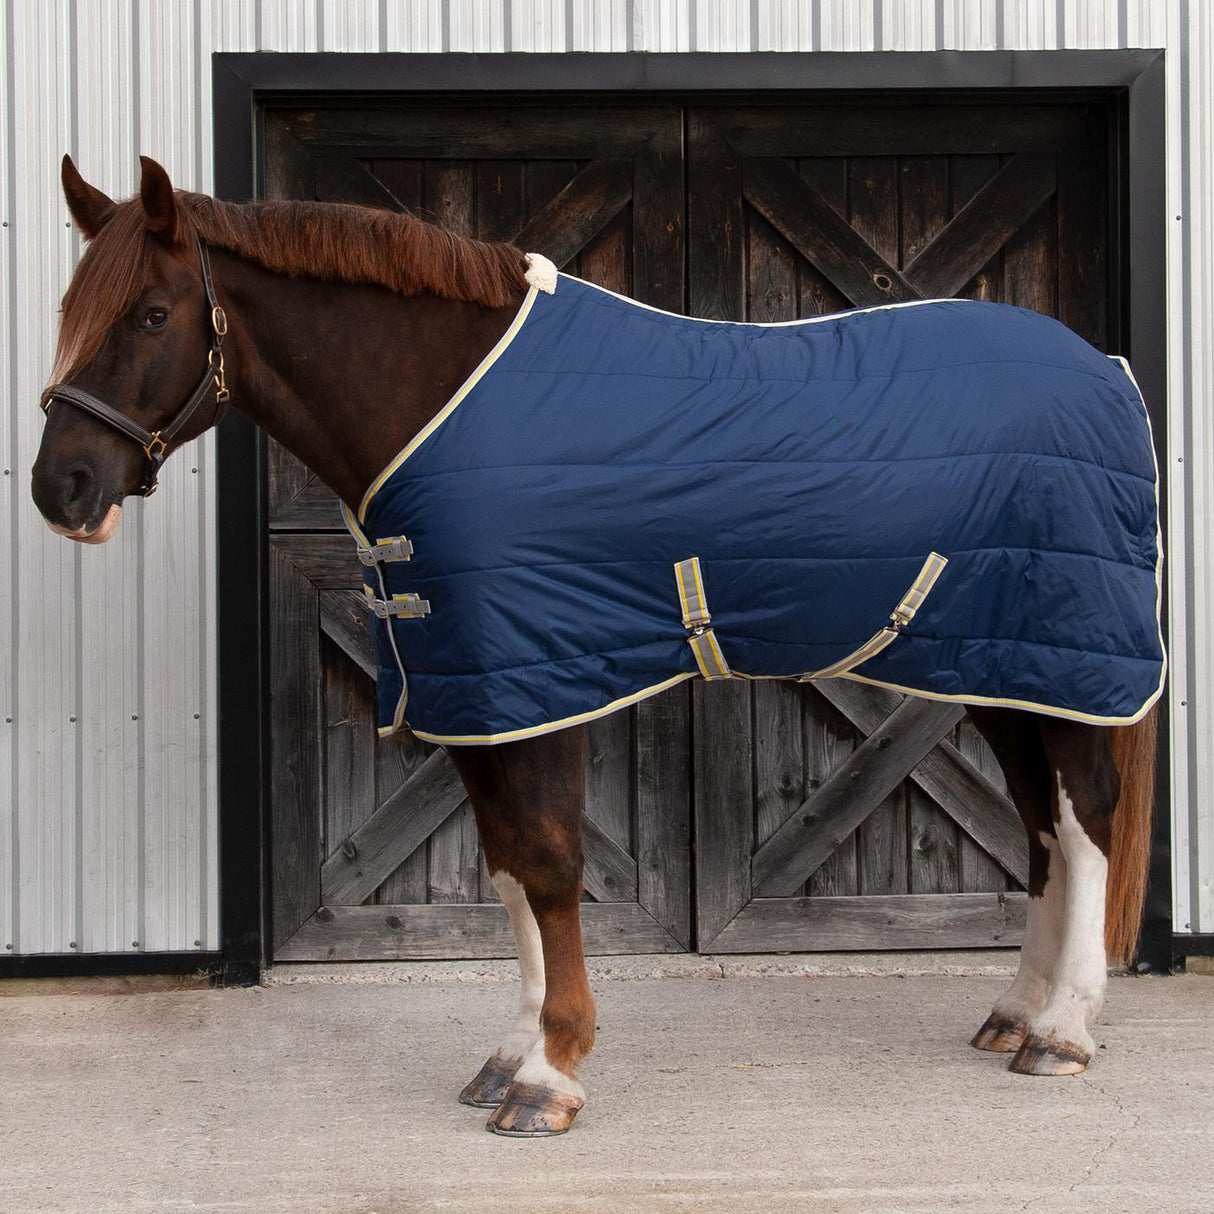 Summit Calor Stable Blanket 200 g